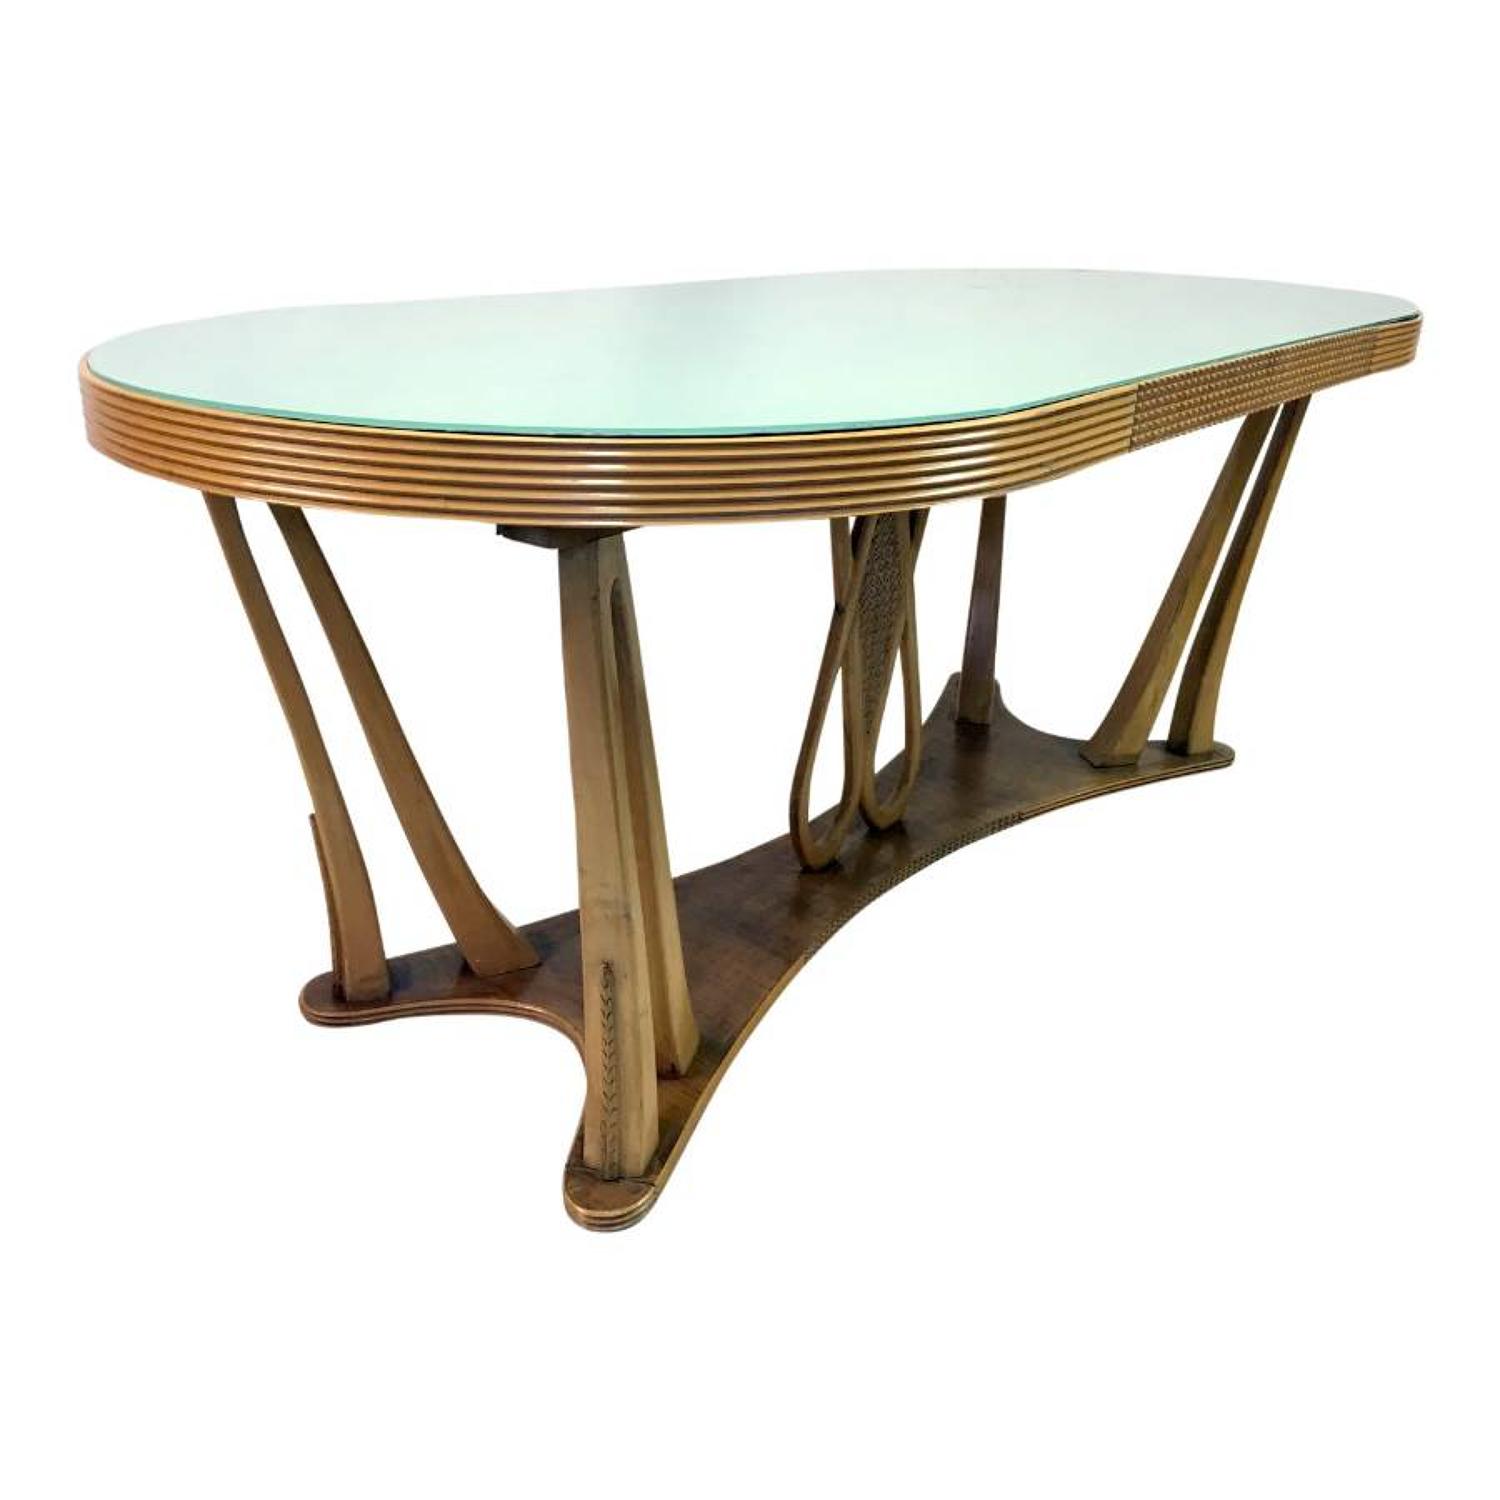 1940s Italian dining table with glass top